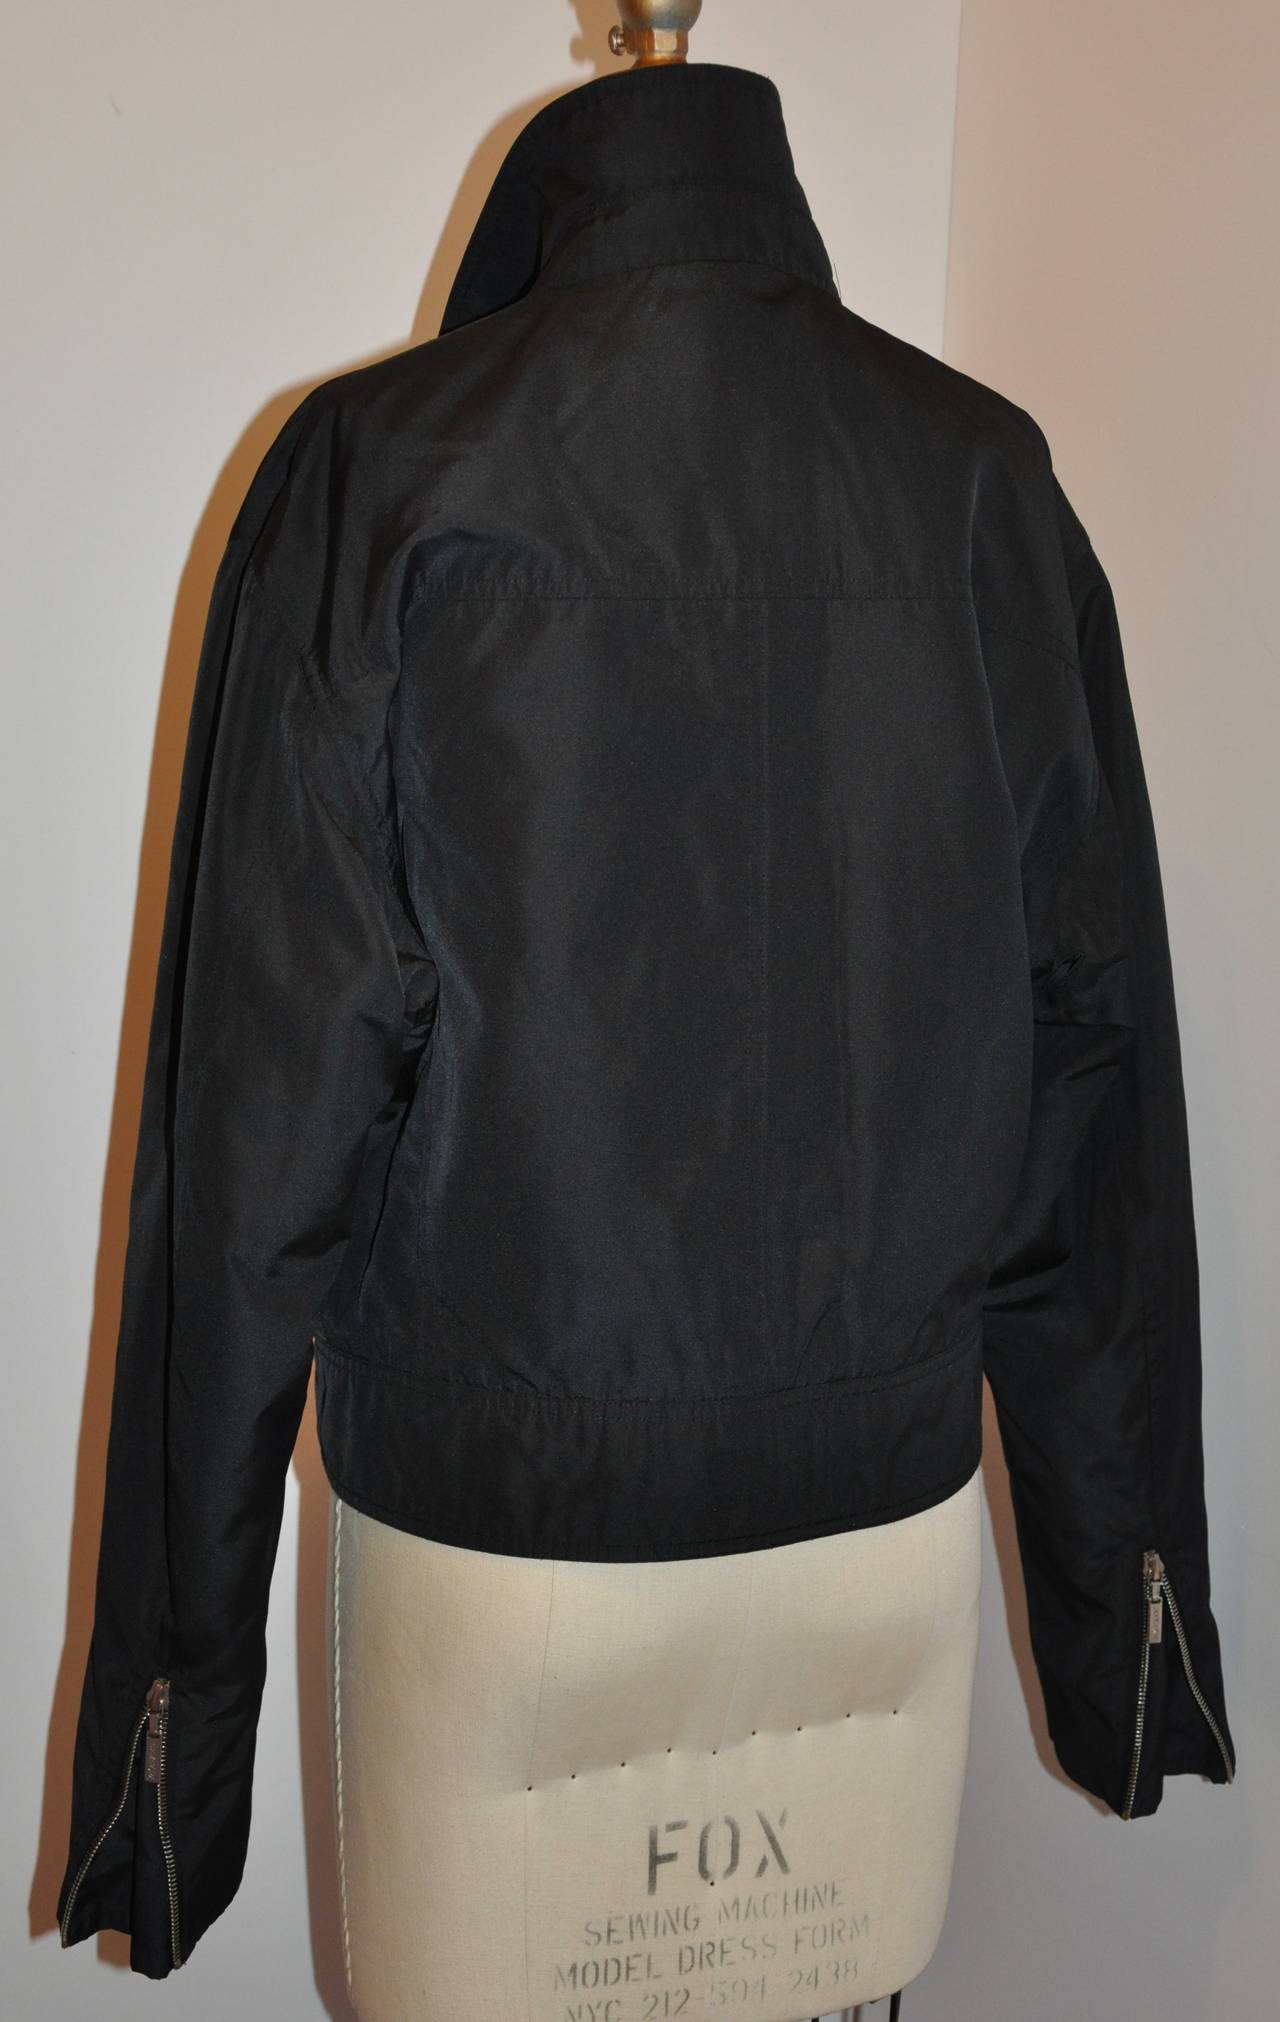 Yves Saint Laurent men's zipper jacket is fully lined accented with two (2) interior breast pockets. The exterior has two pockets accented with a flap. The collar measures 2